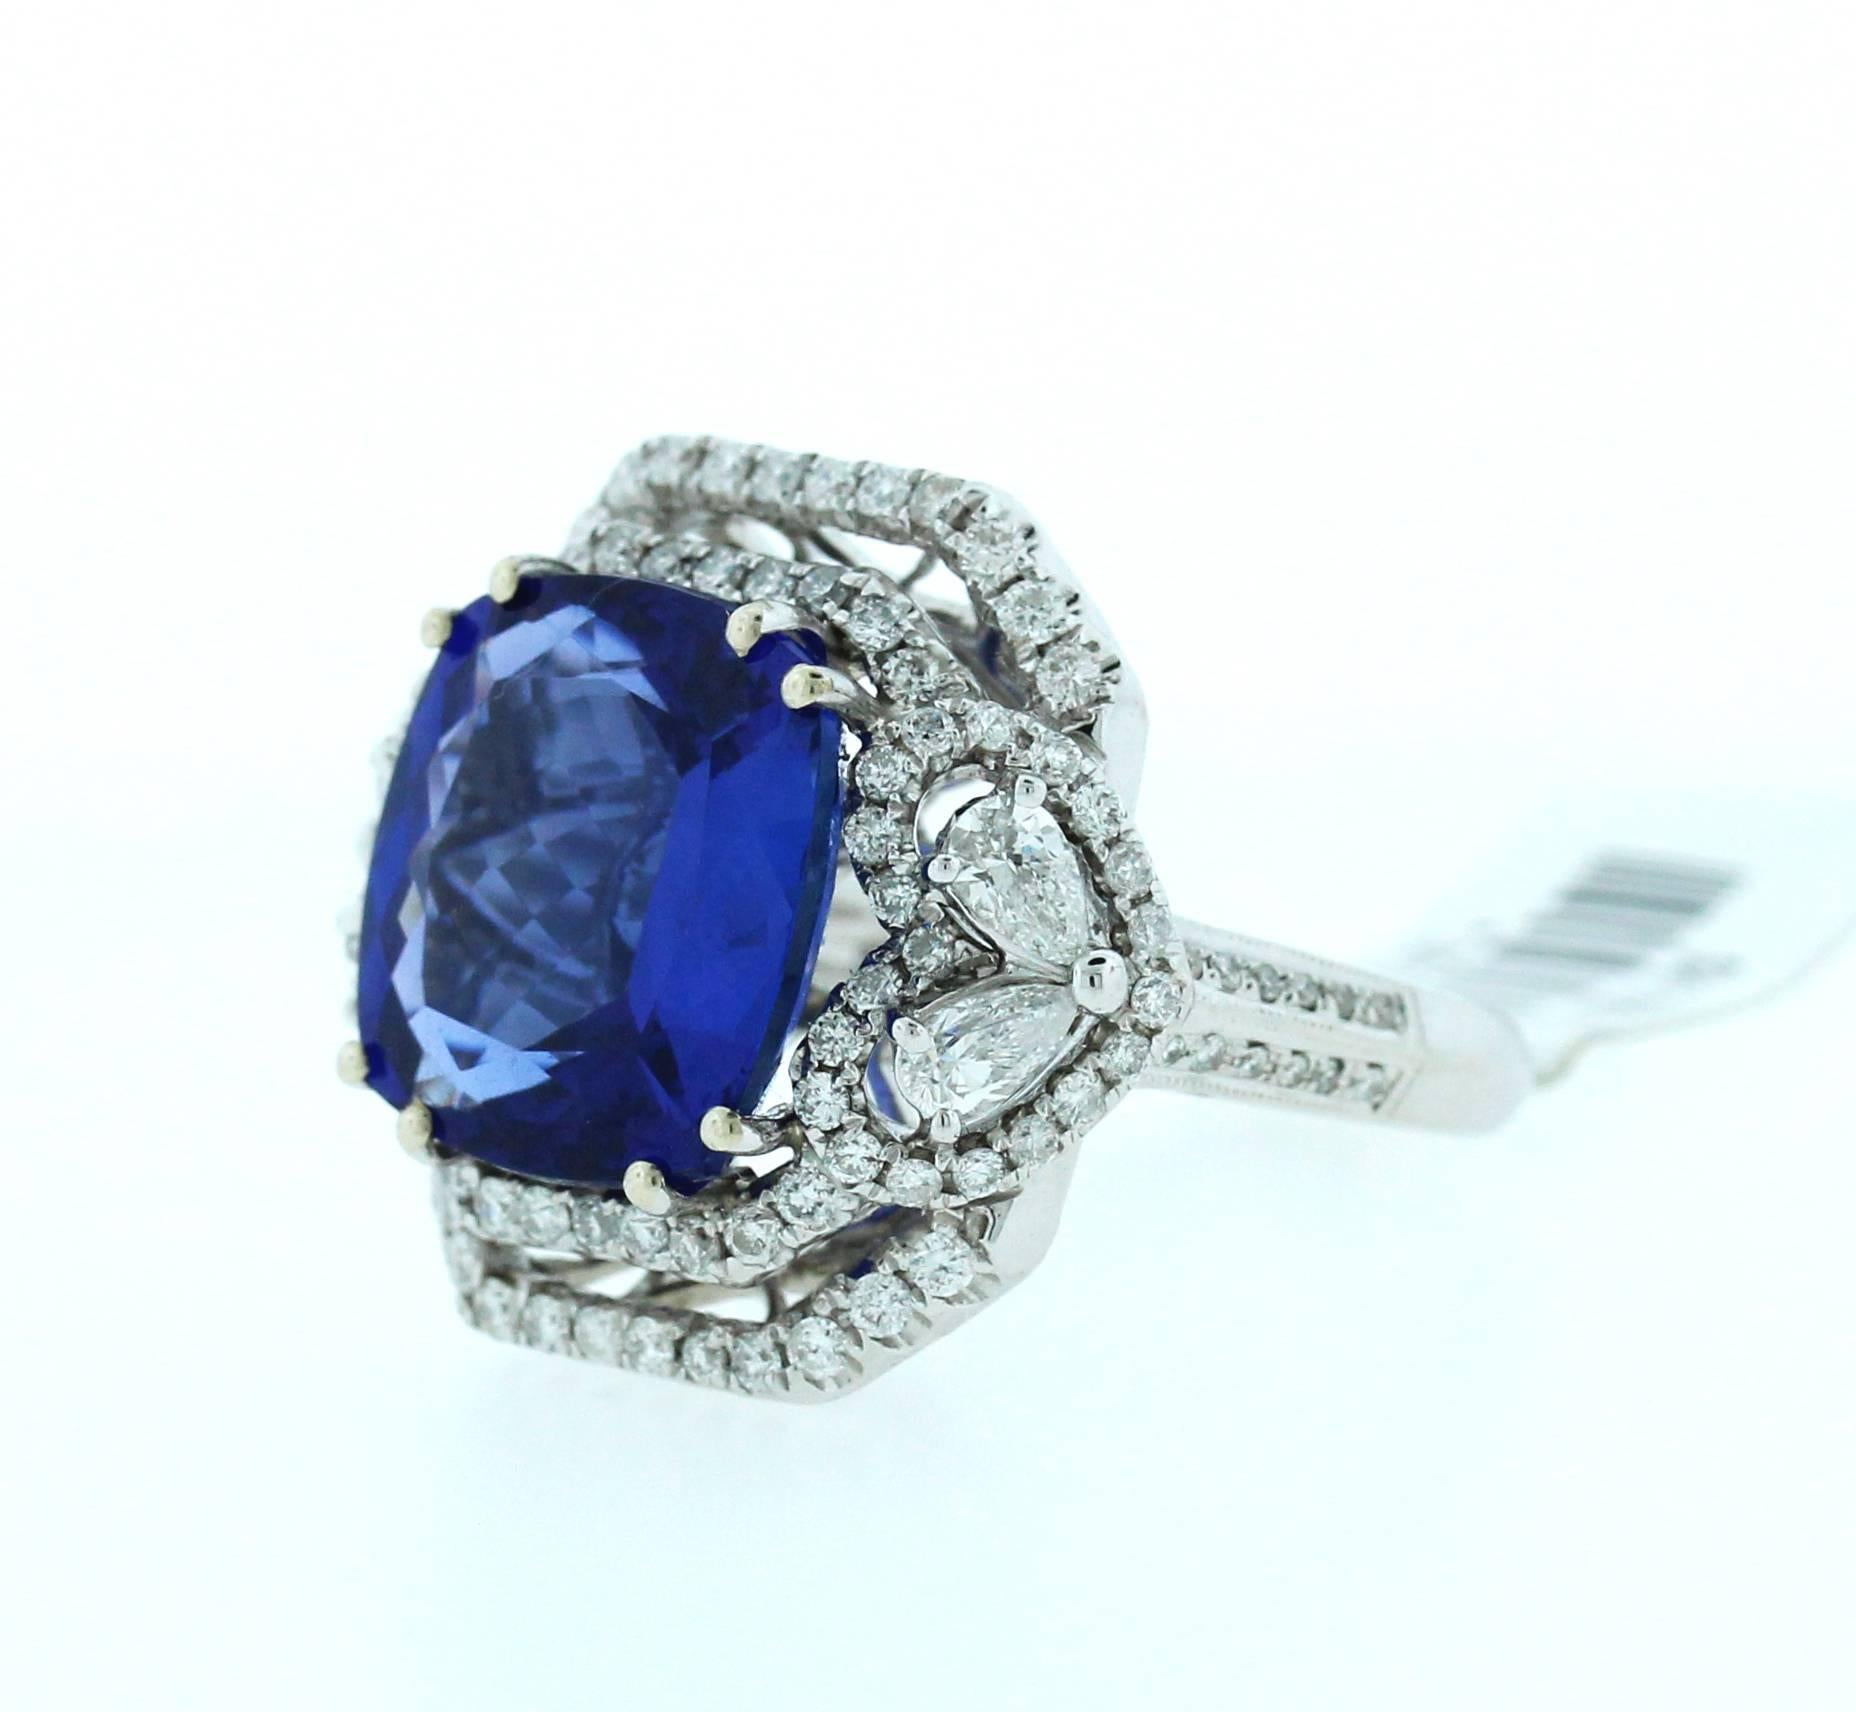 18K Gold Ring with Tanzanite Center and White Diamonds

10.32ct. Tanzanite

3.20ct. apprx. White diamonds

Currently size 7. Can be sized.

ESTATE